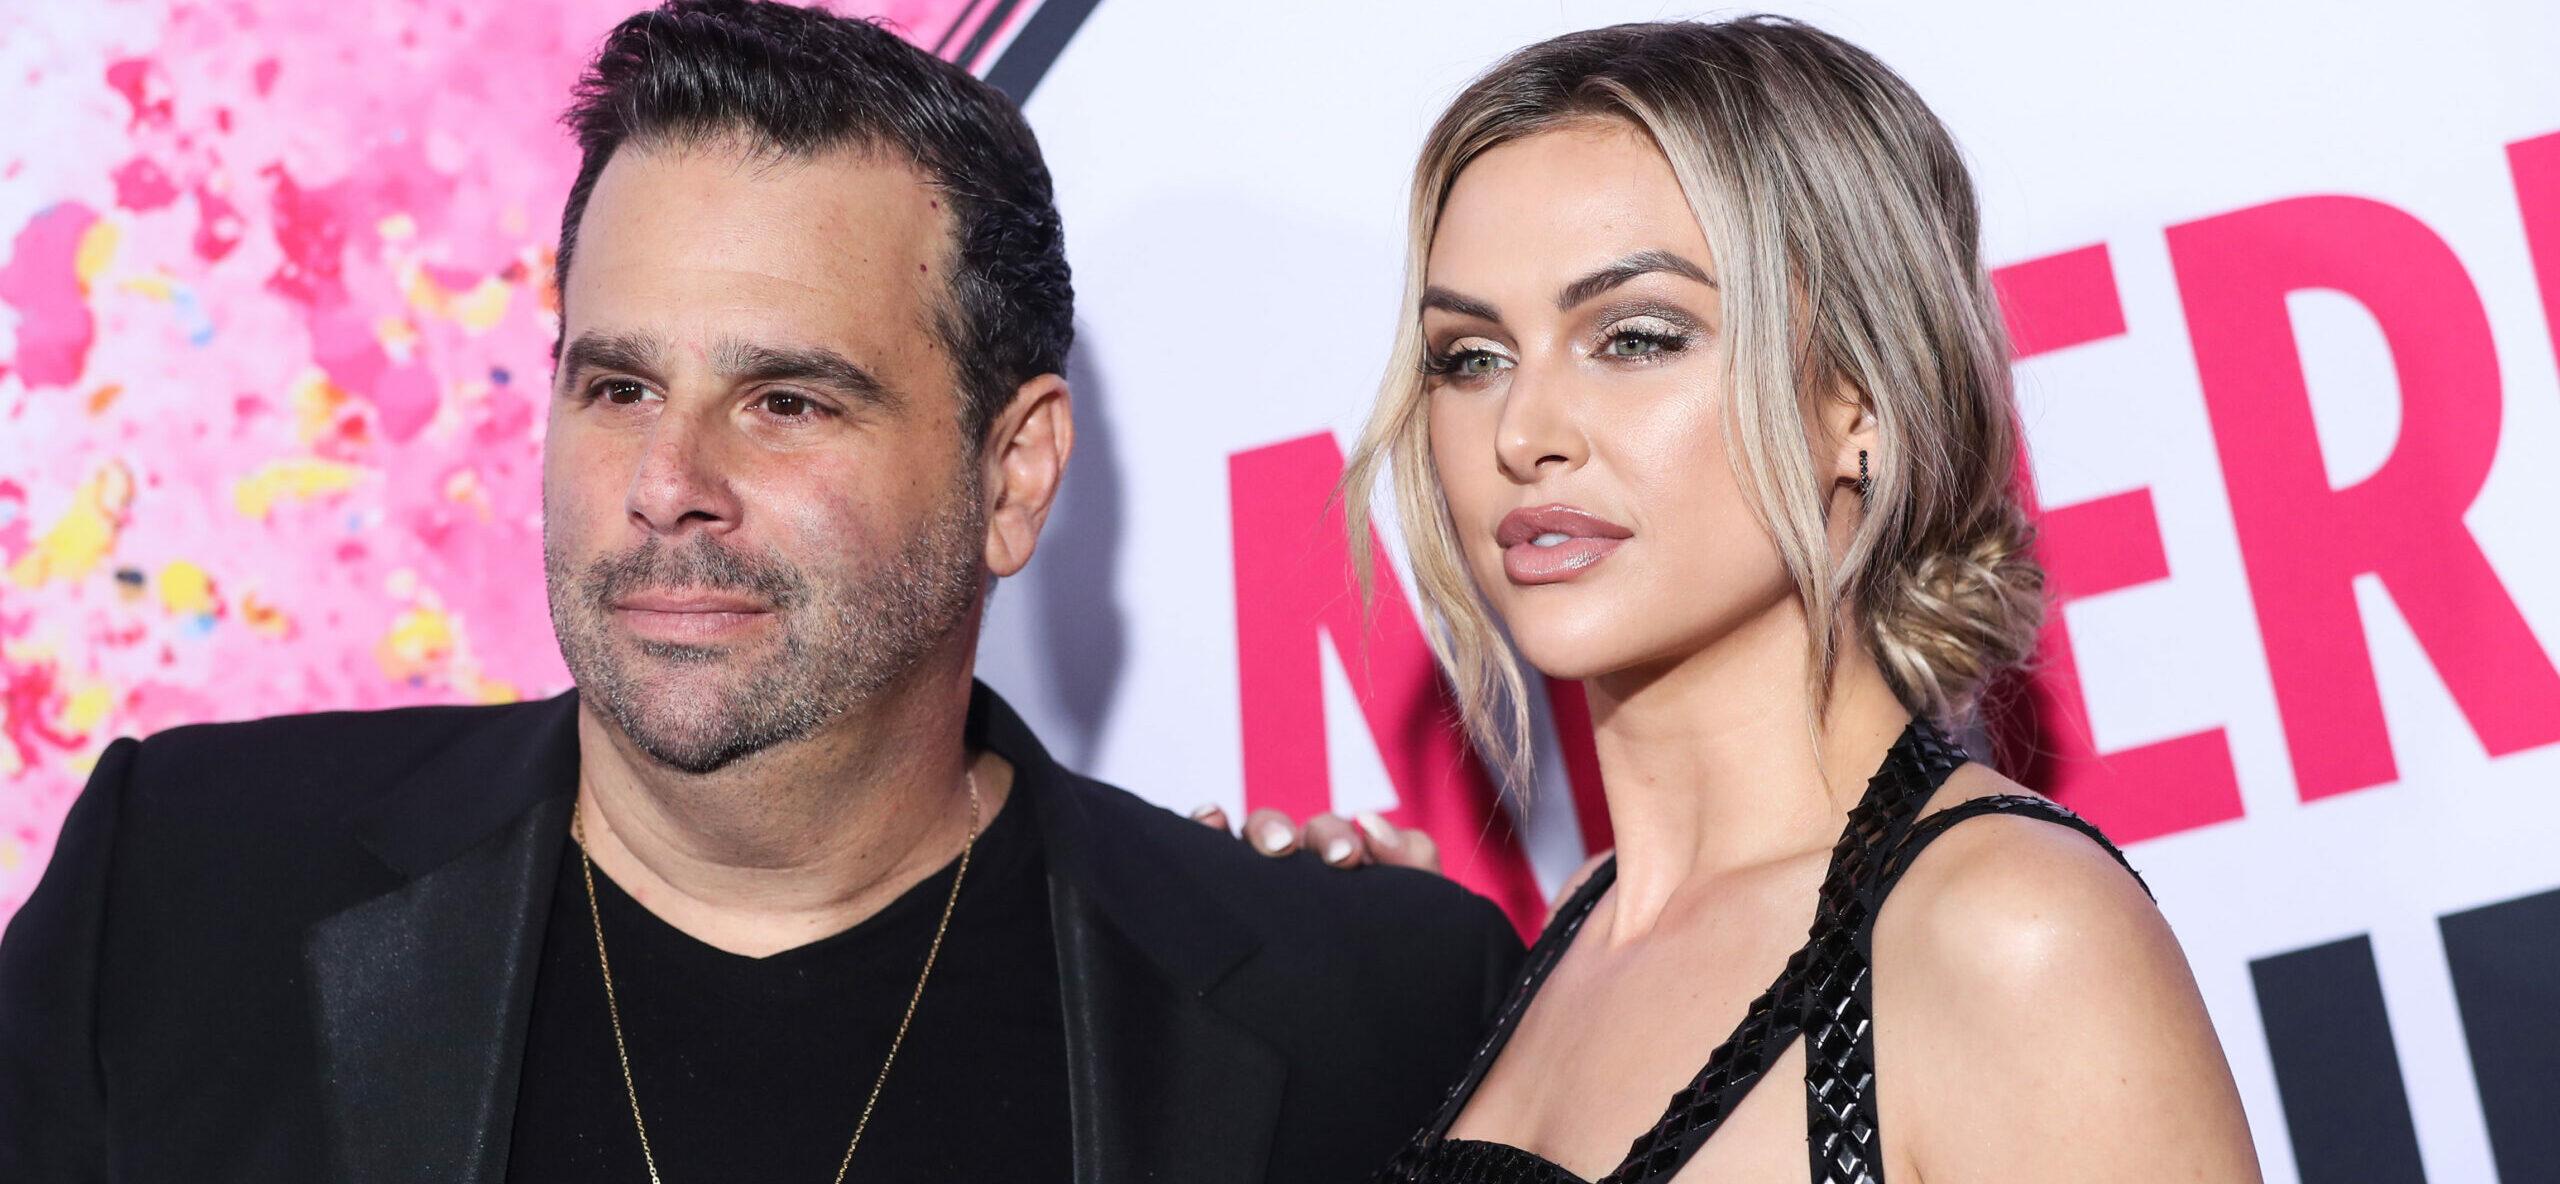 'Vanderpump Rules' Star Calls Ex-Fiancé WORST Thing That's Ever Happened!